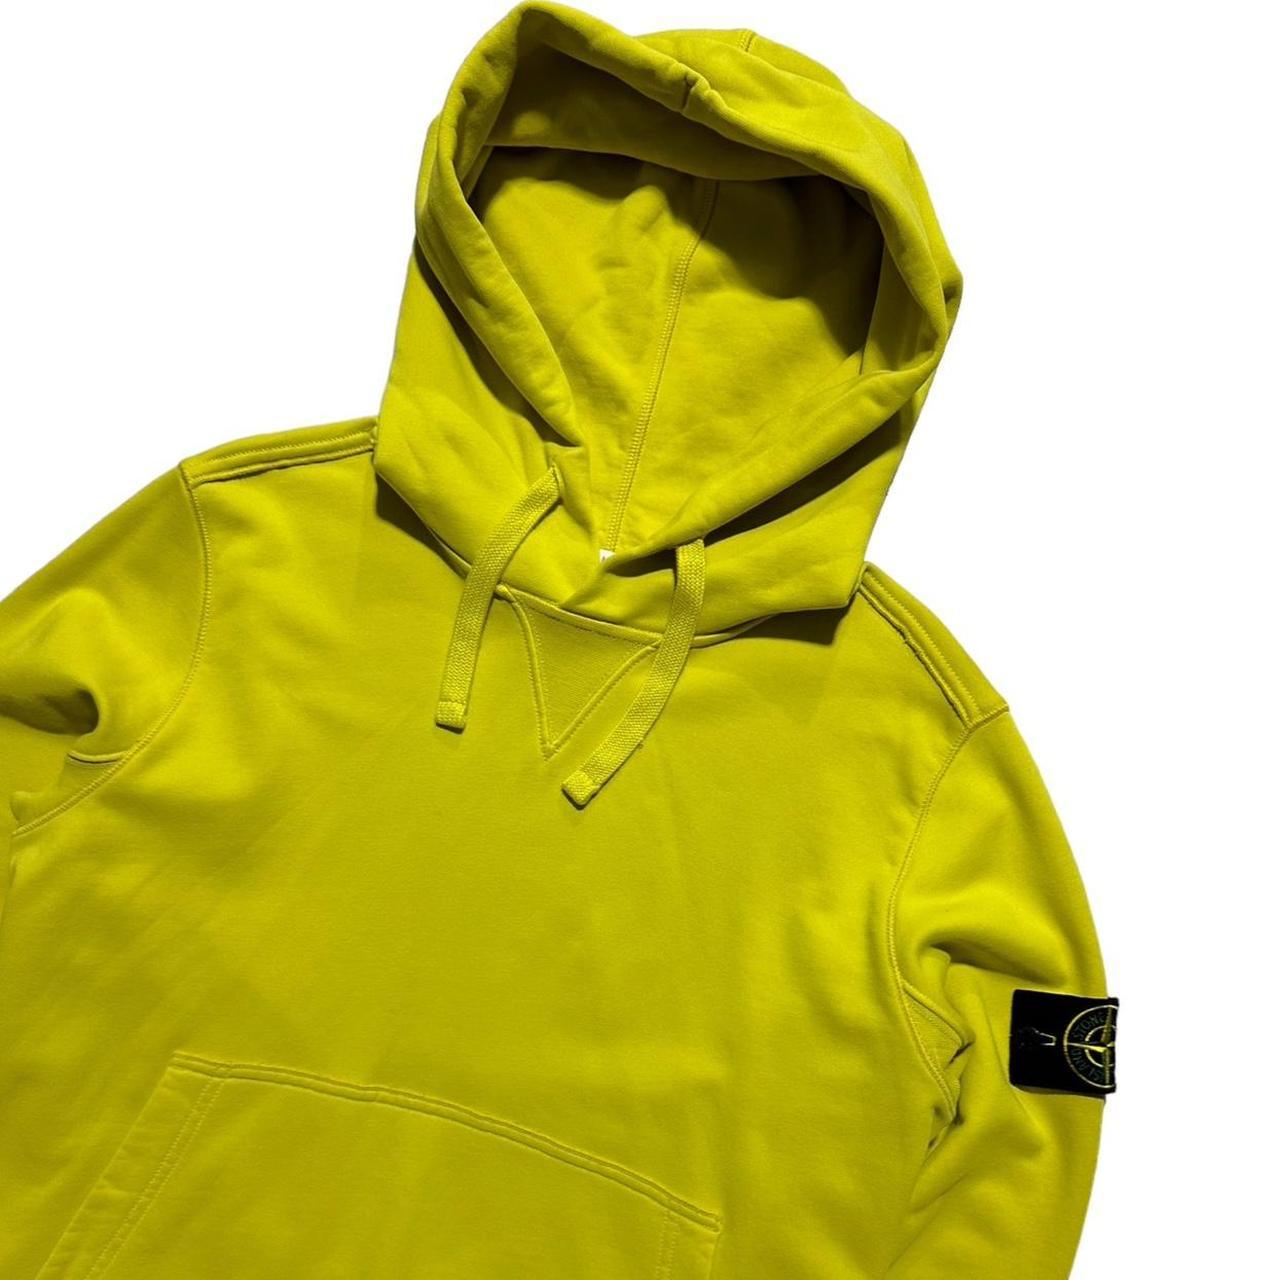 Stone Island Yellow Pullover Hoodie - Known Source